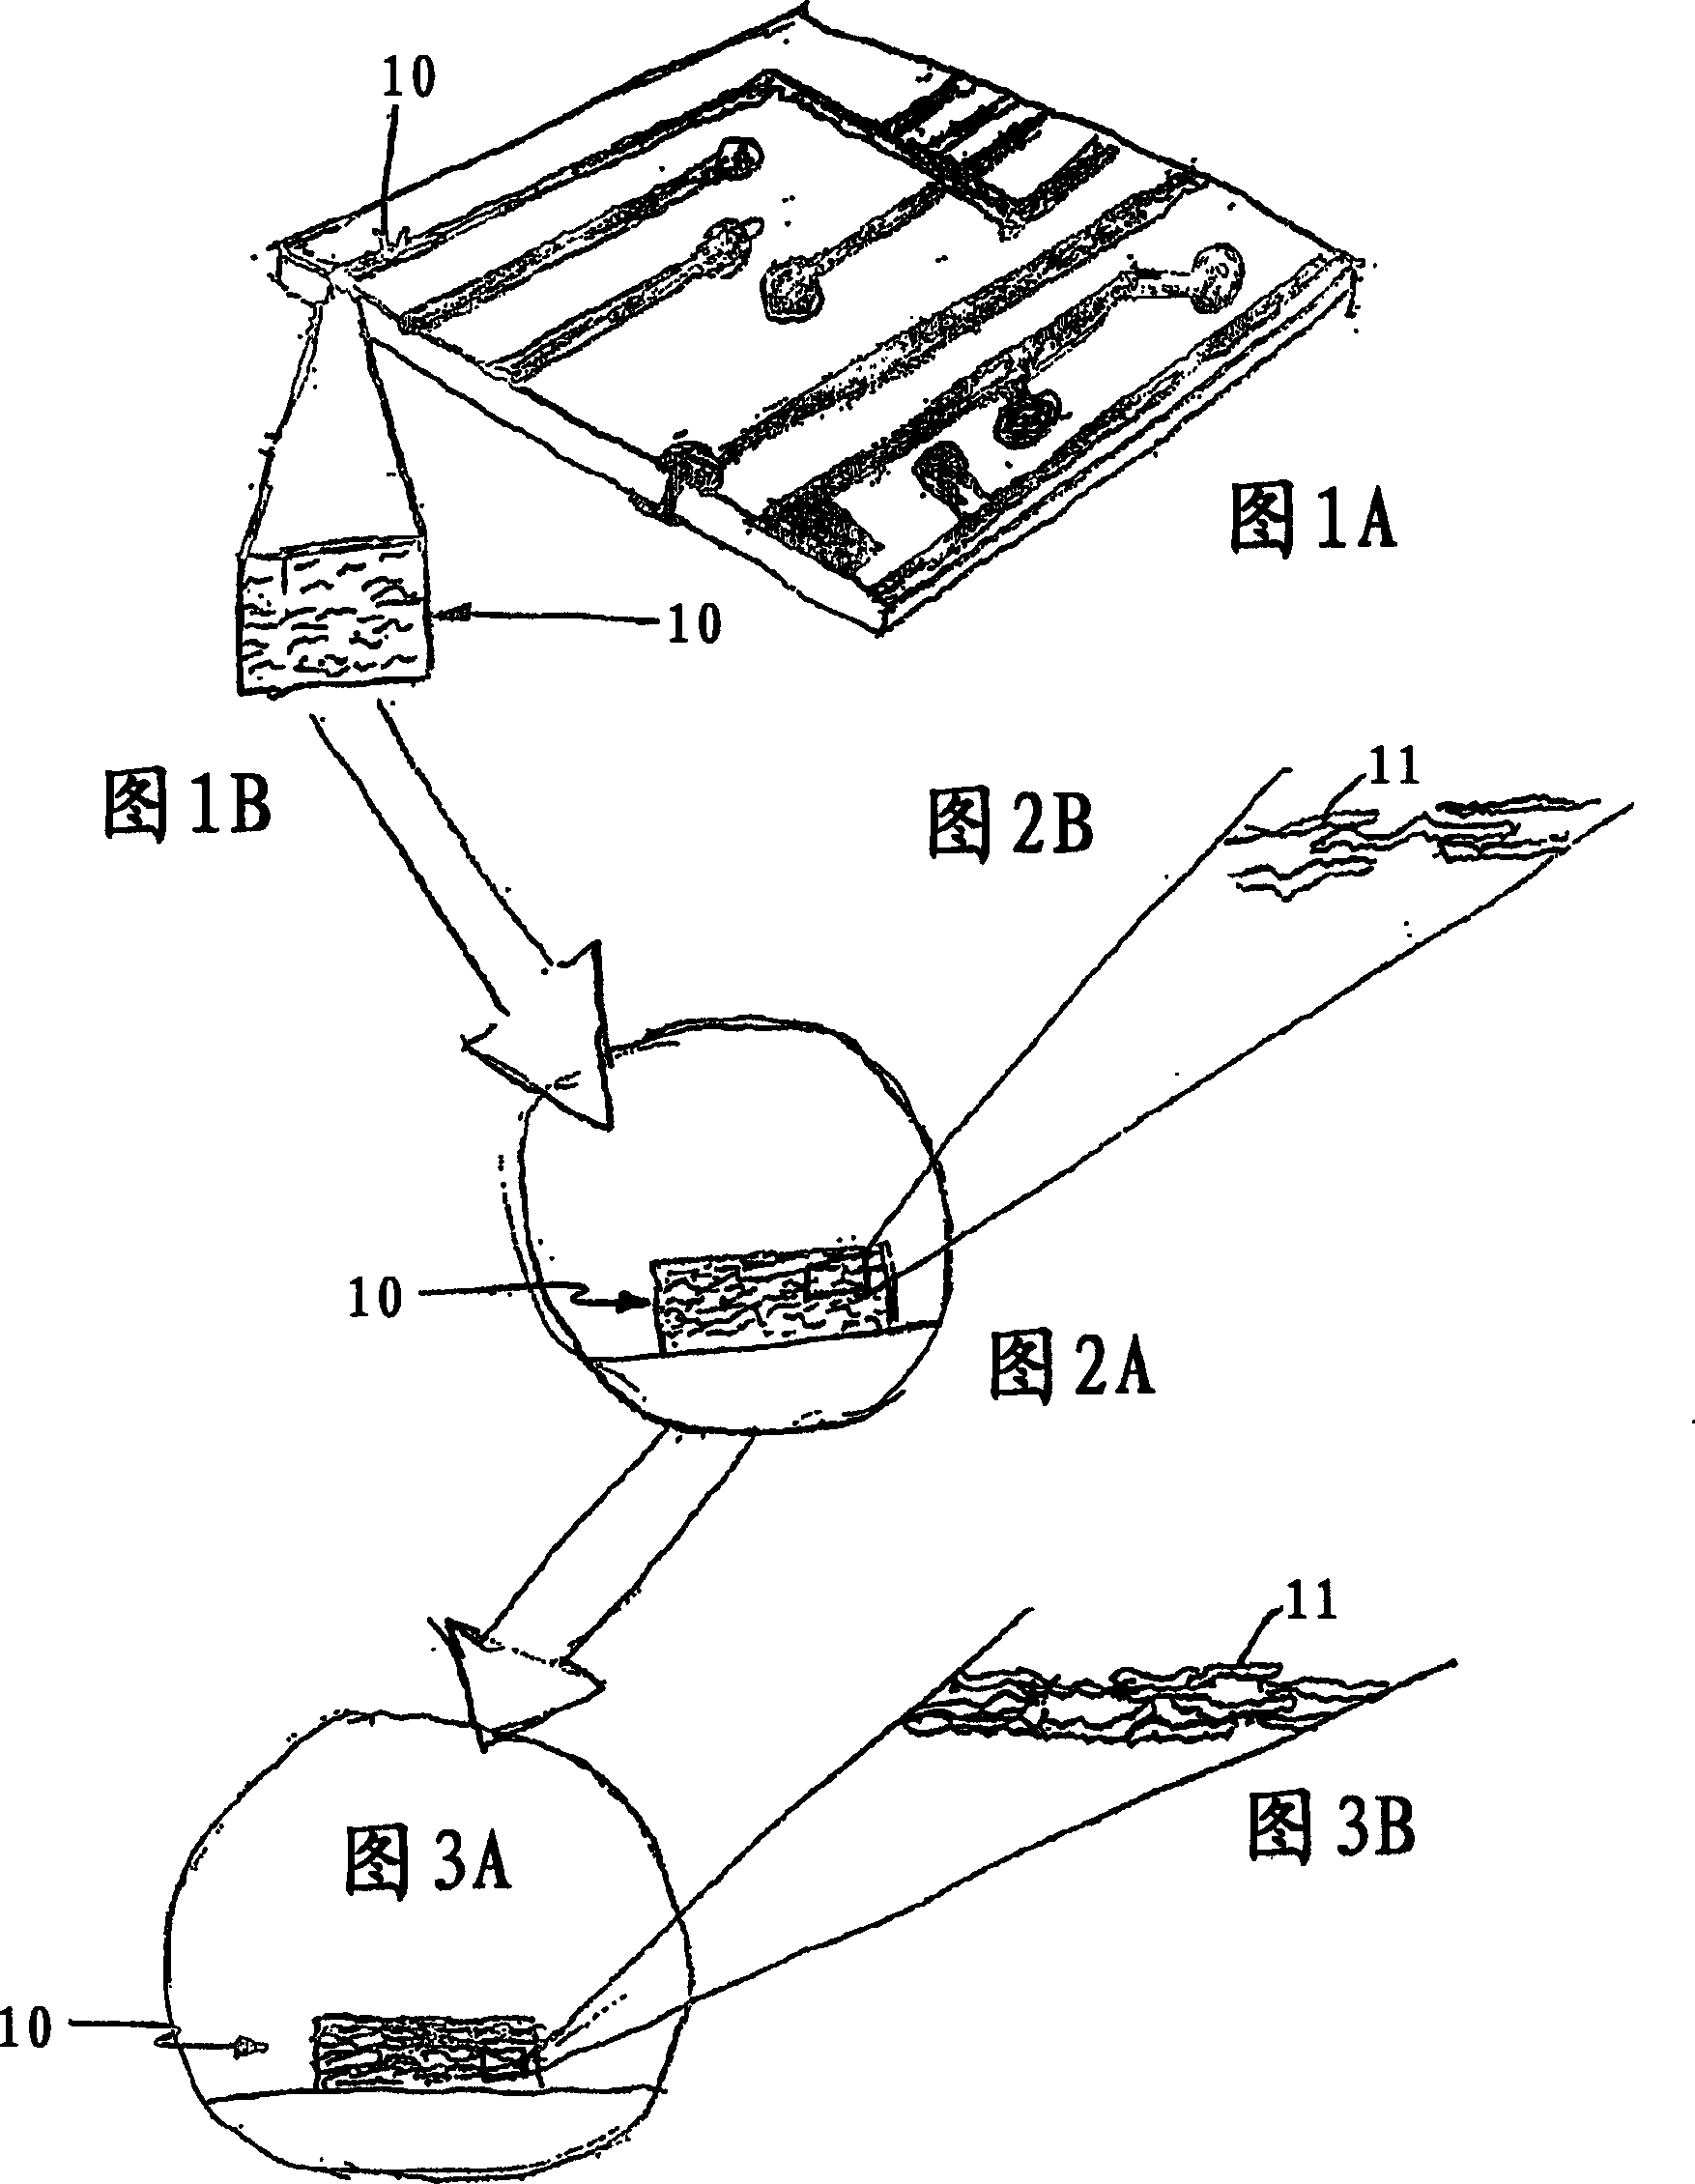 A conductive composition and method of using the same